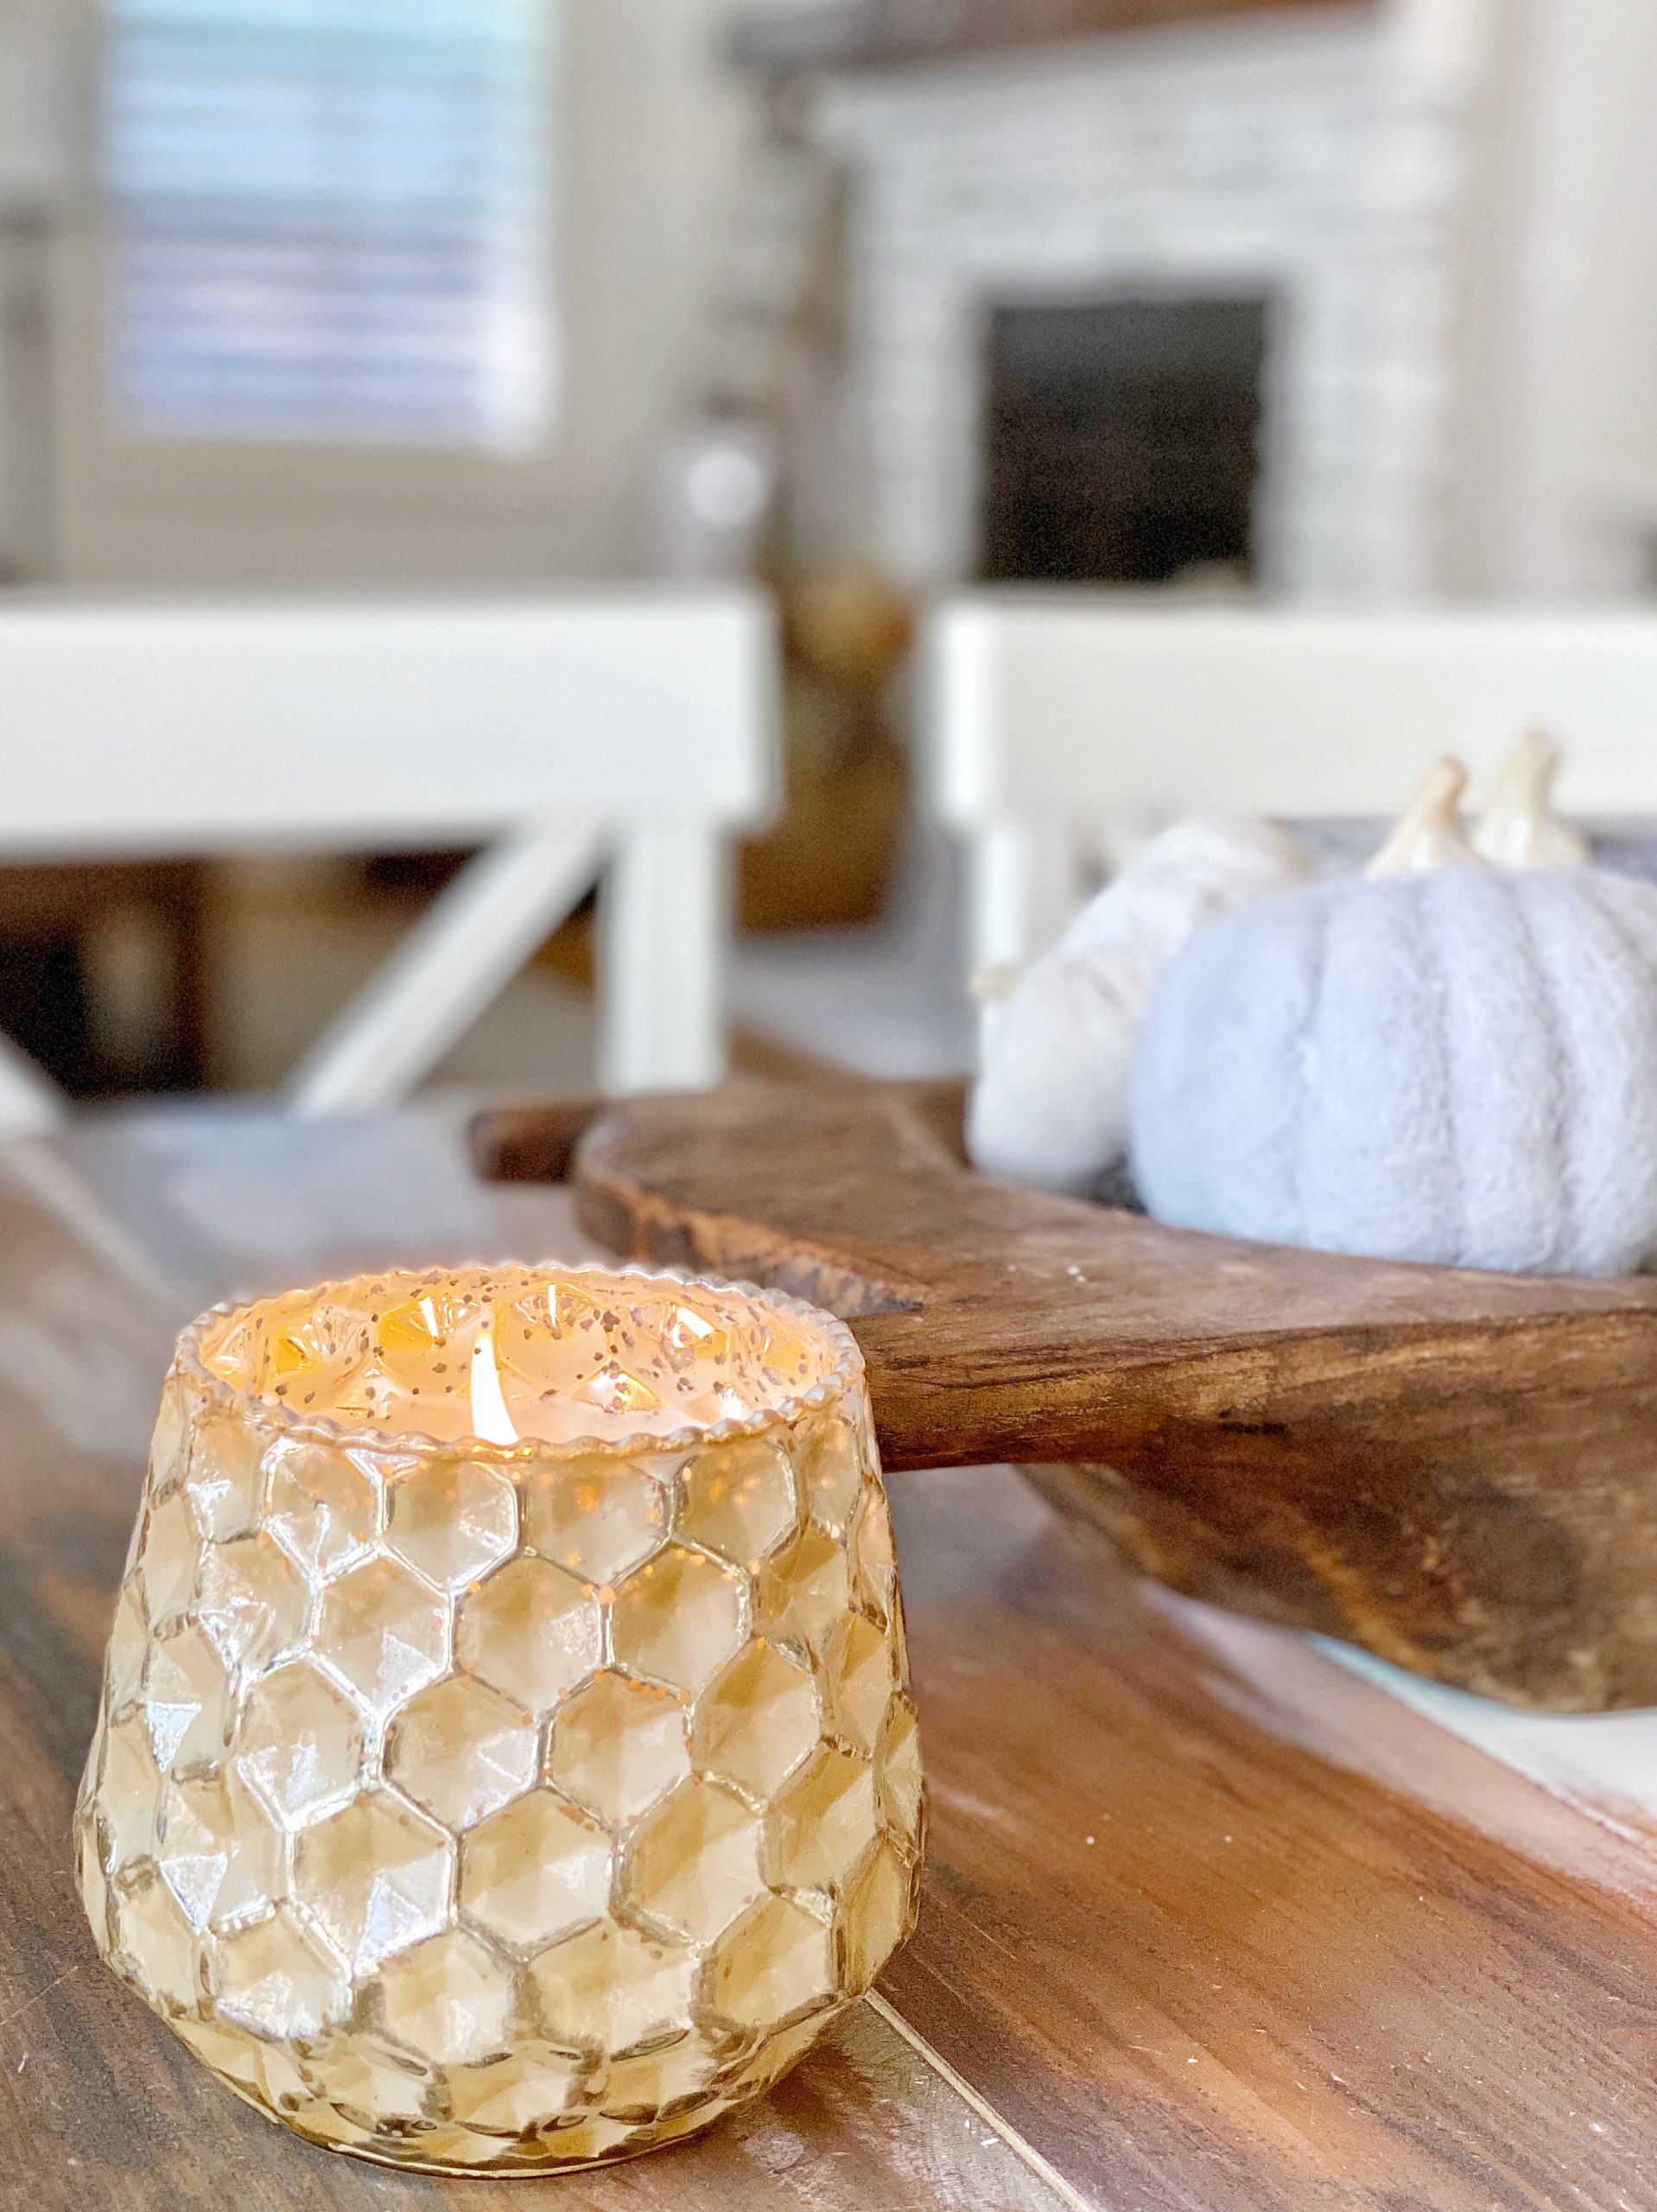 Want to Know What my Six Favorite Fall Candles Are?